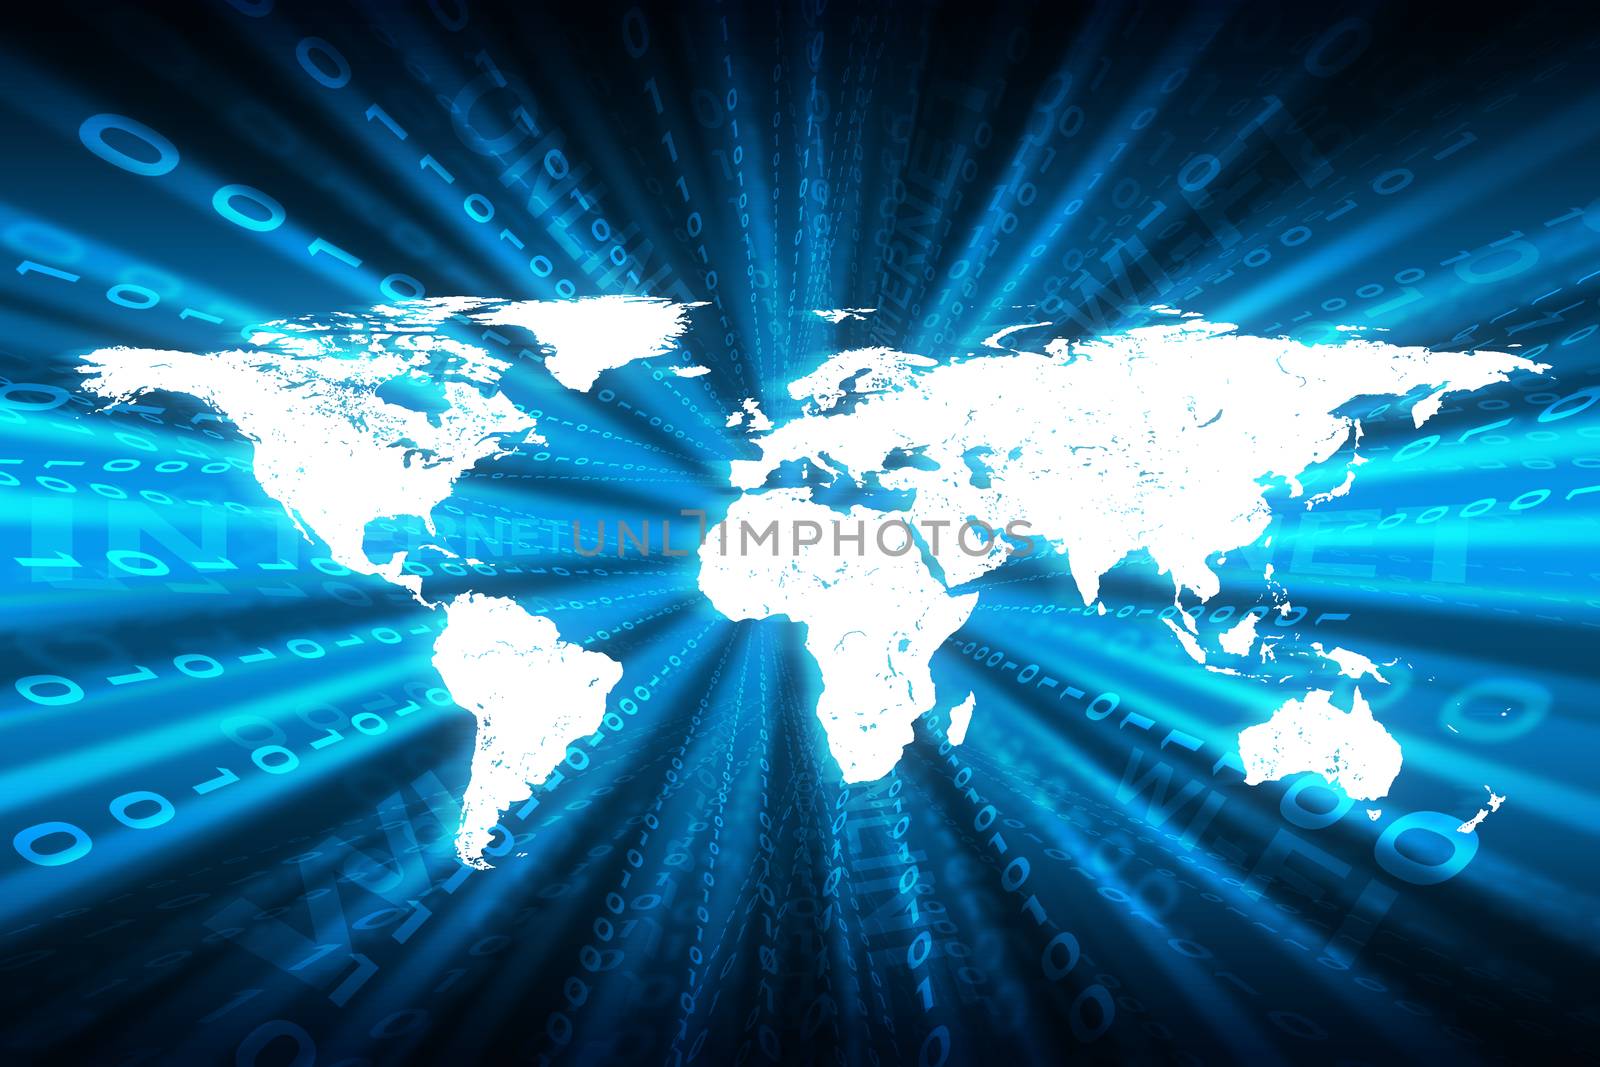 Abstract matrix blue background with numbers, world map and business words